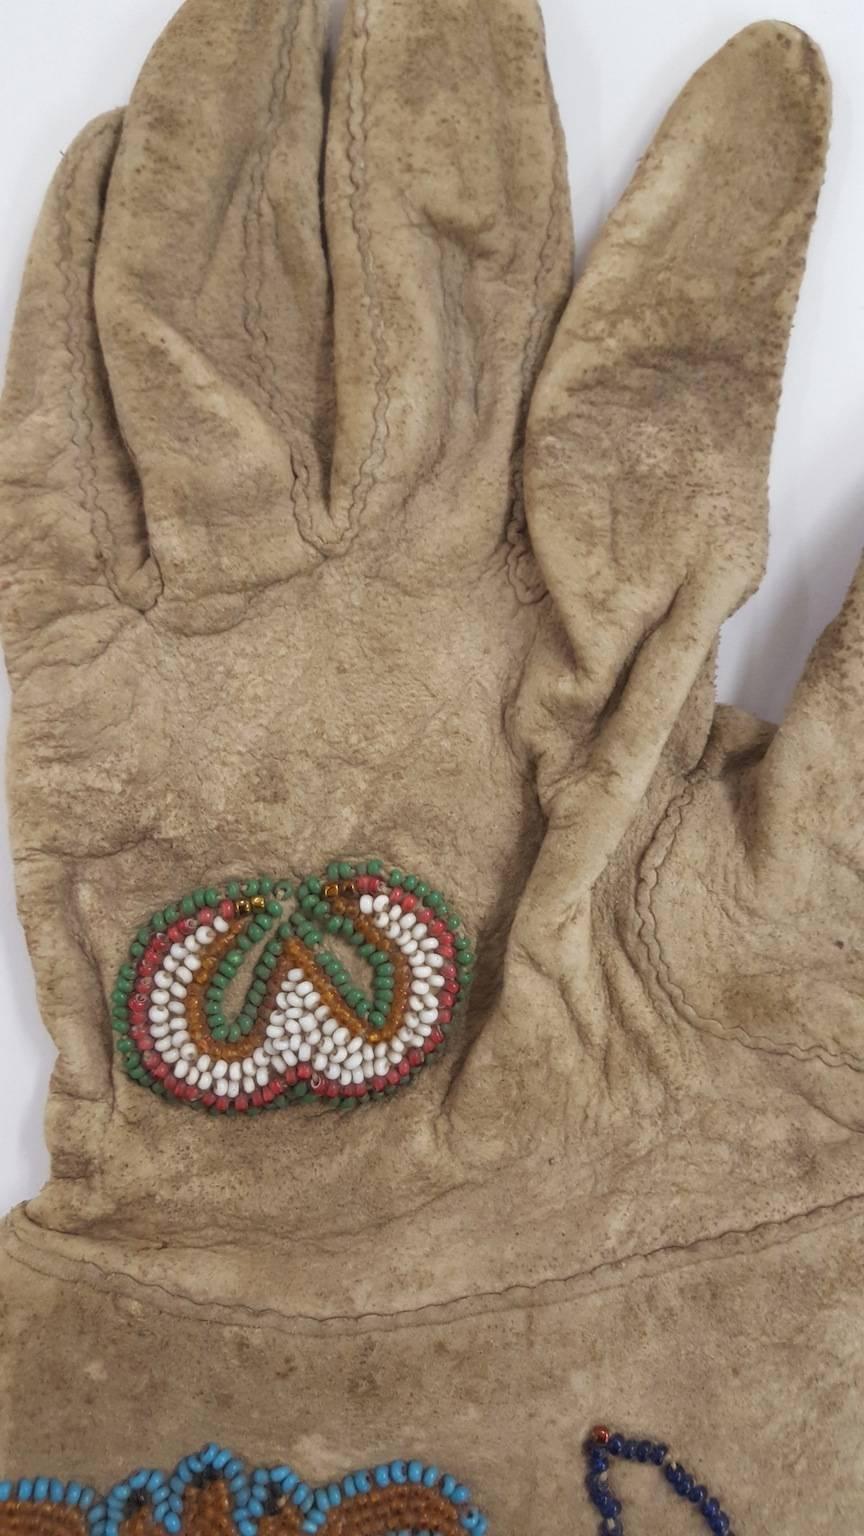 Needlework 19th Century Native American Beaded Gloves, likely for a woman.